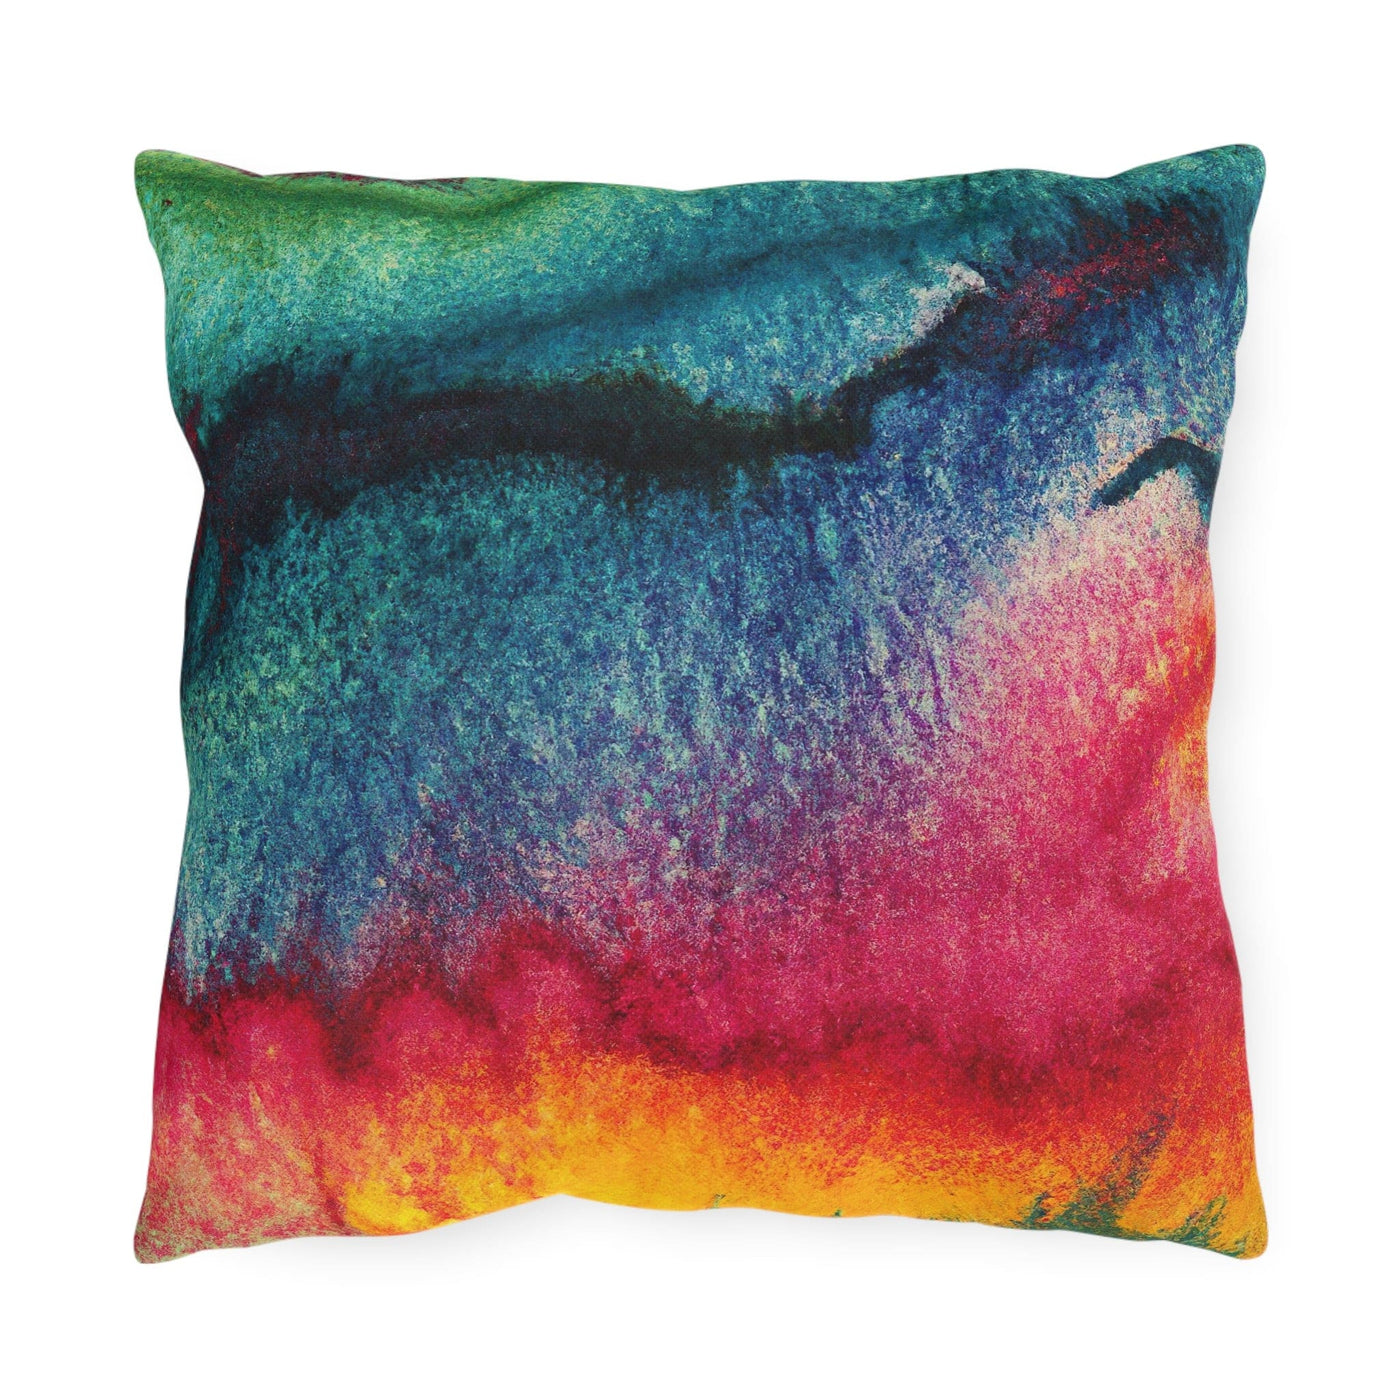 Decorative Outdoor Pillows With Zipper - Set Of 2 Multicolor Watercolor